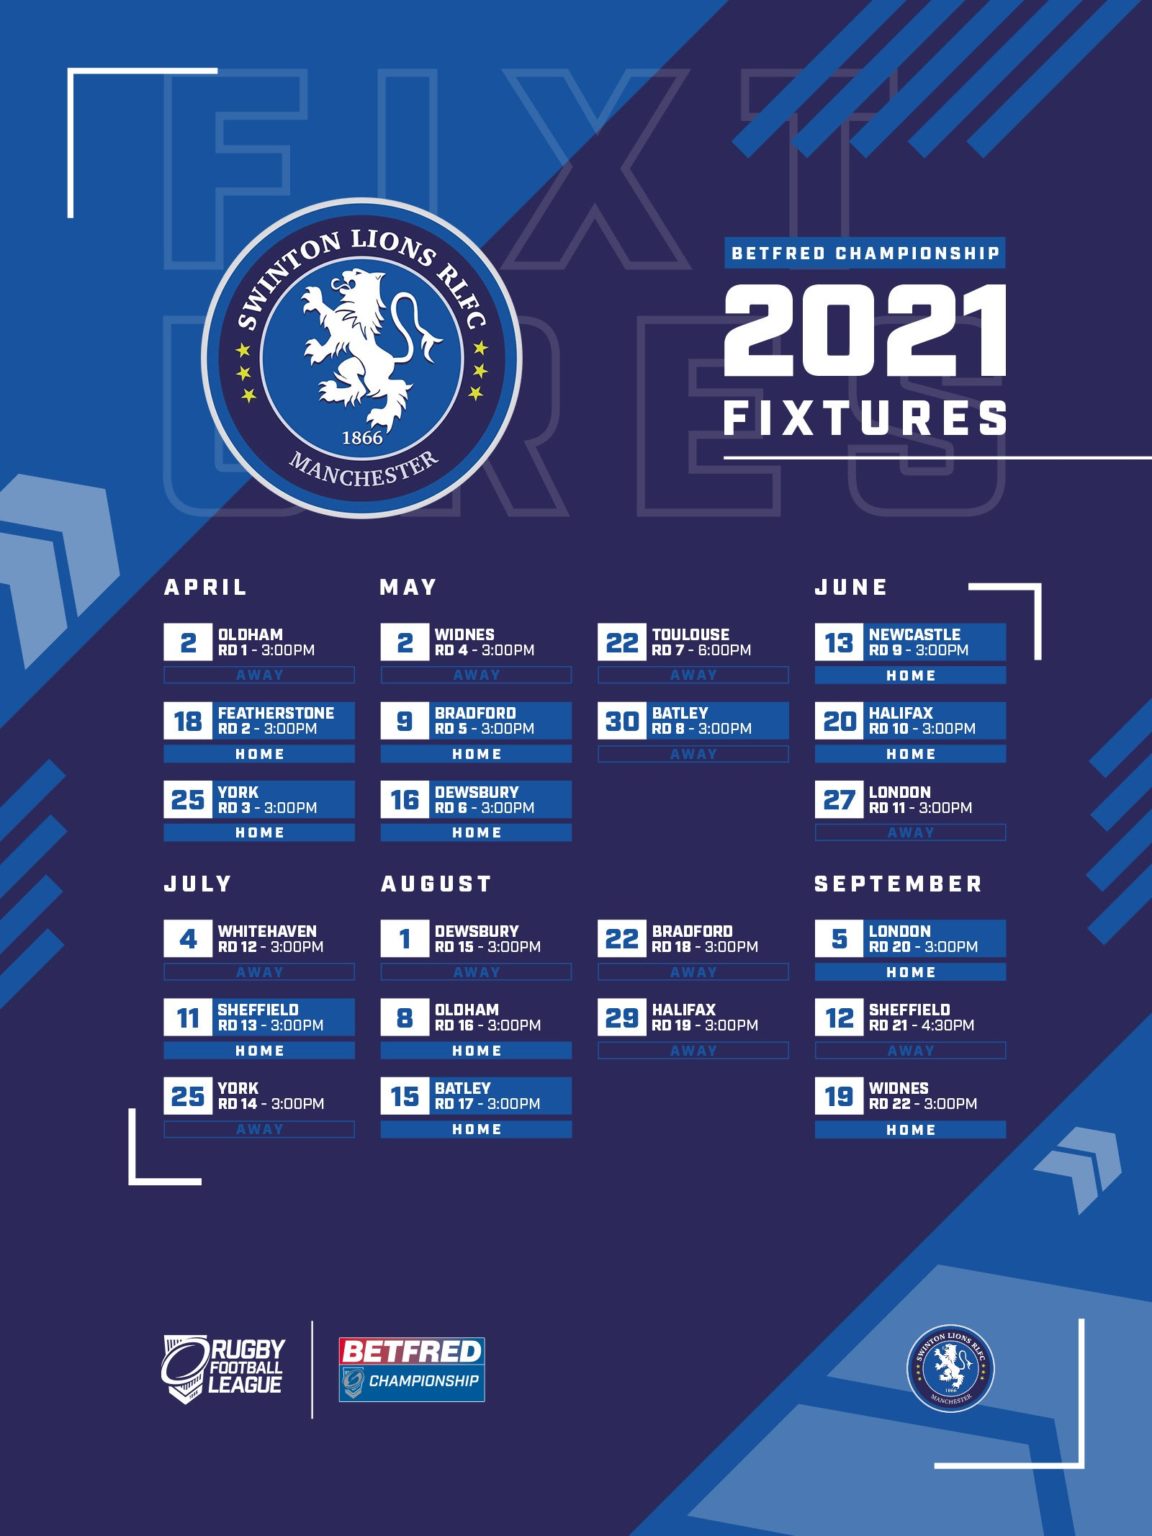 2021 BetFred Championship Fixtures Announced ! — Swinton Lions RLFC